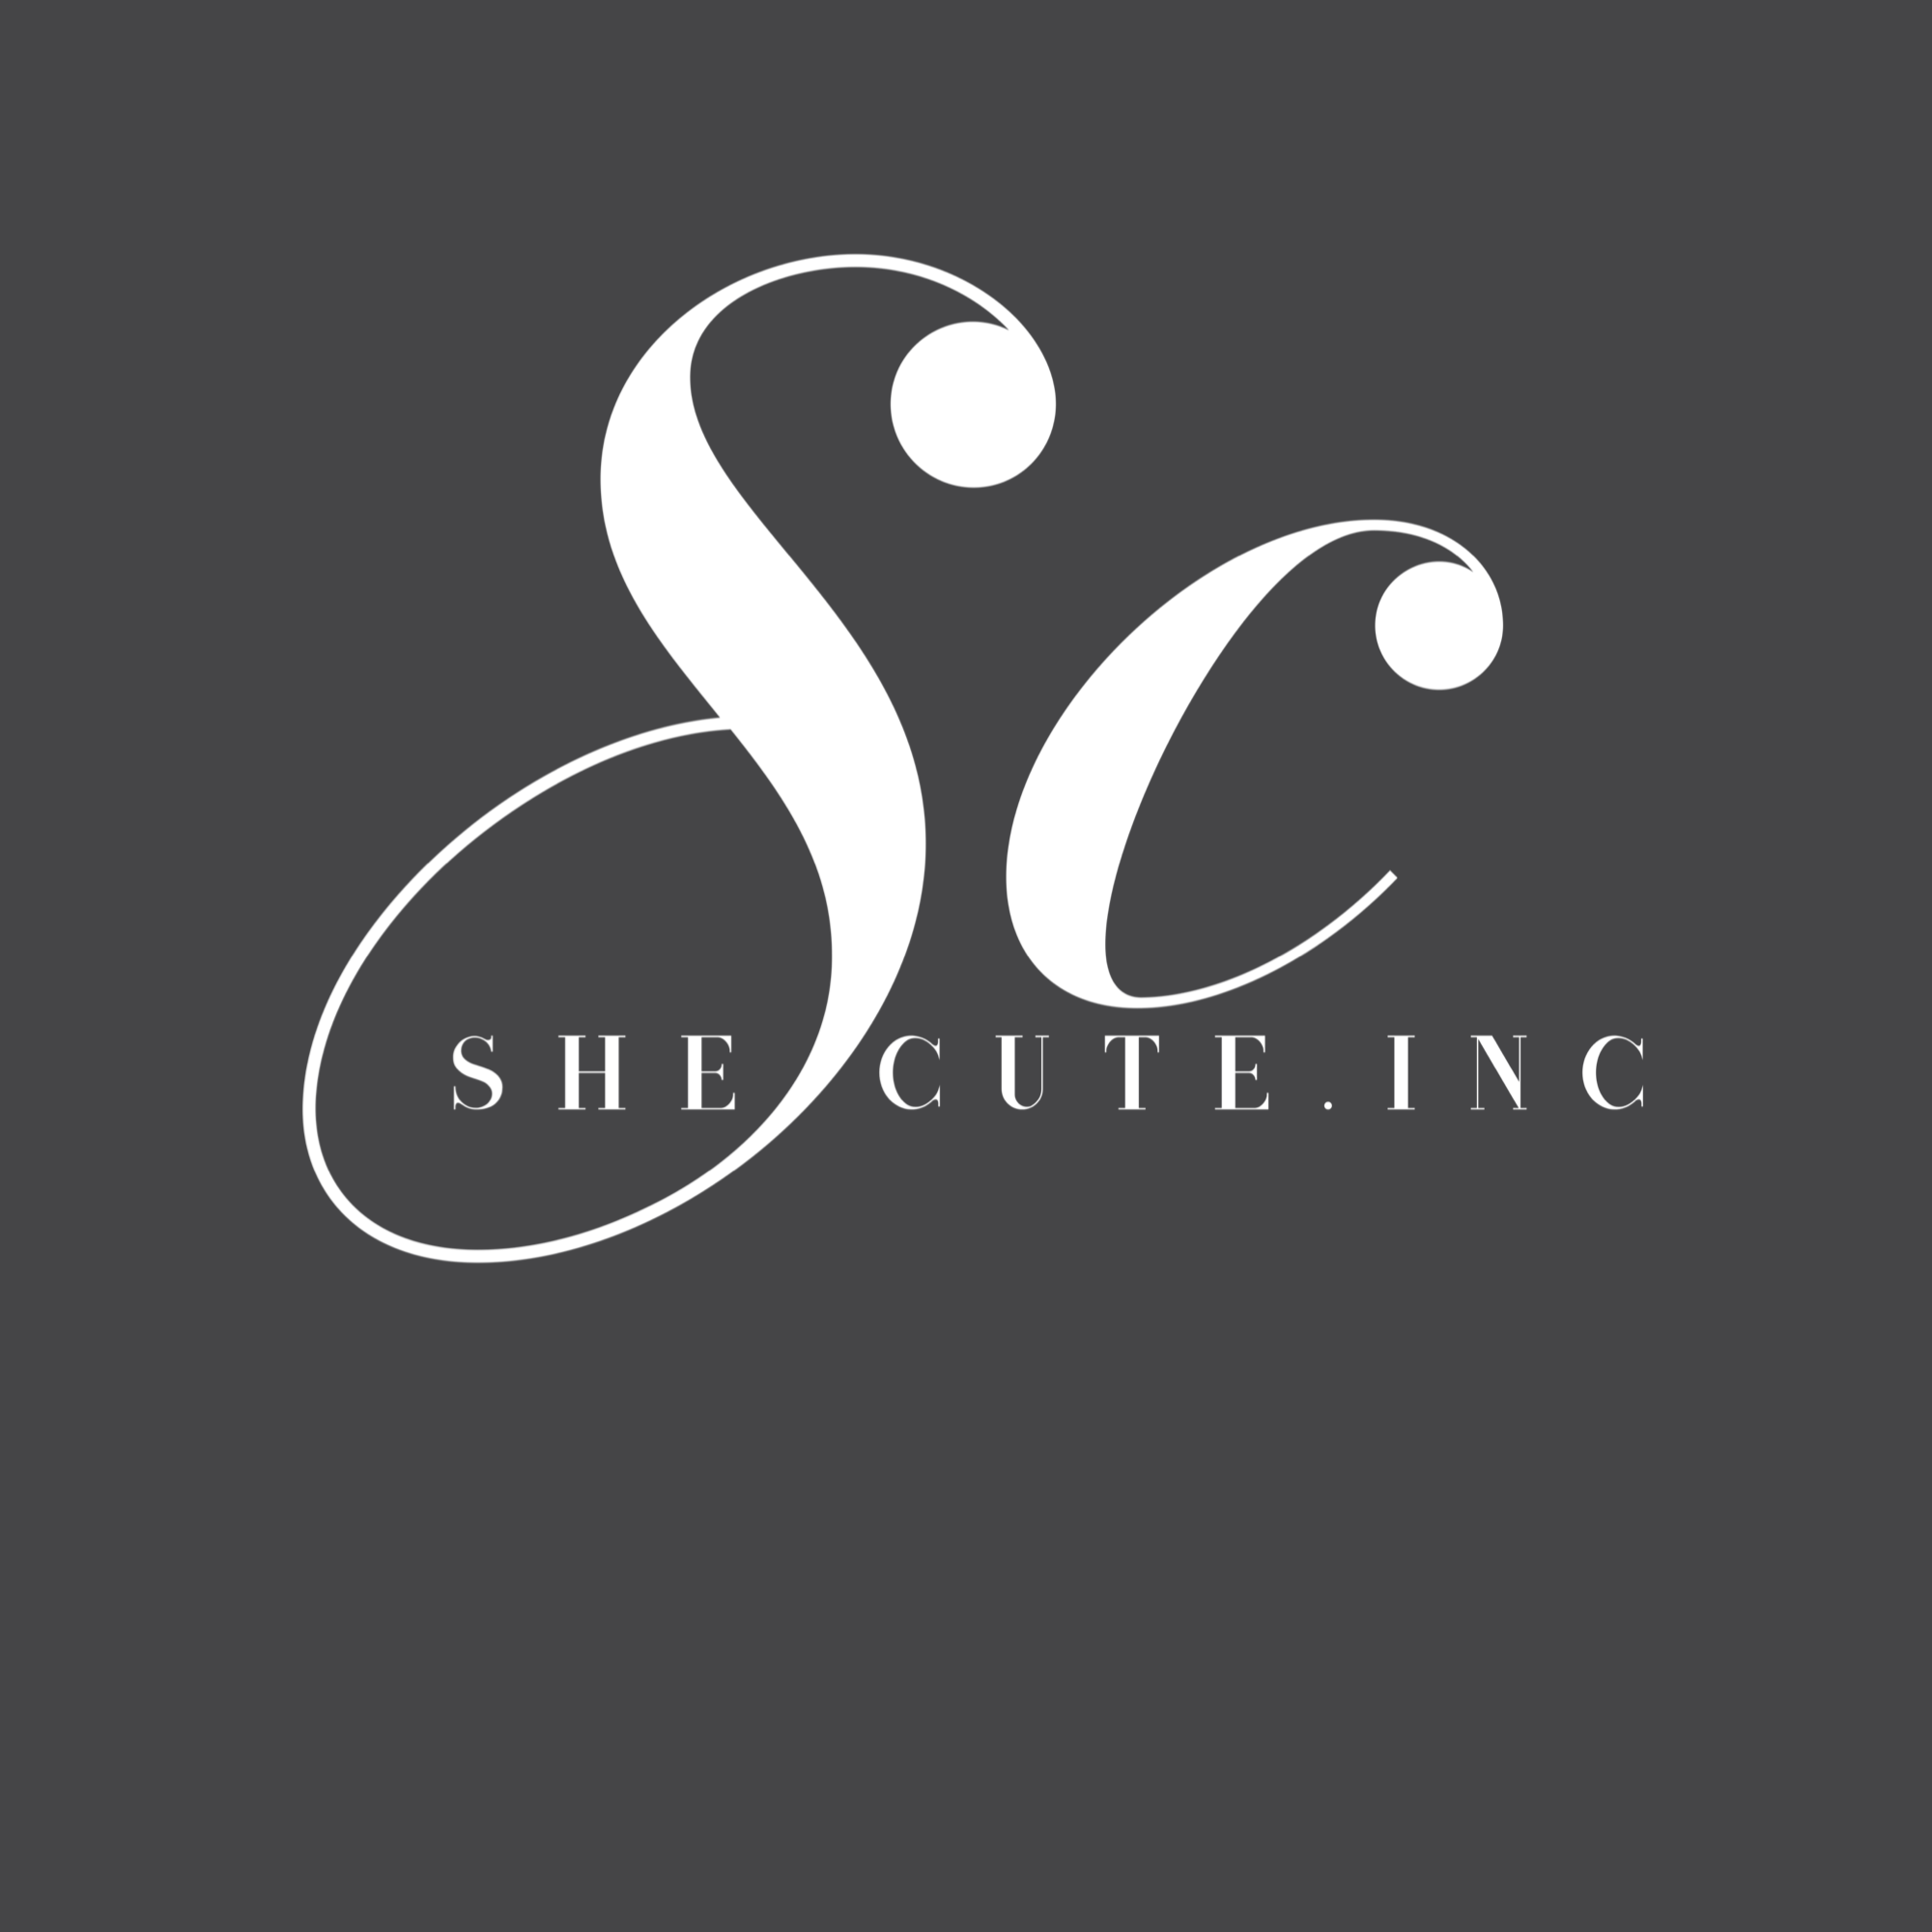 The logo or business face of "She Cute Inc. "